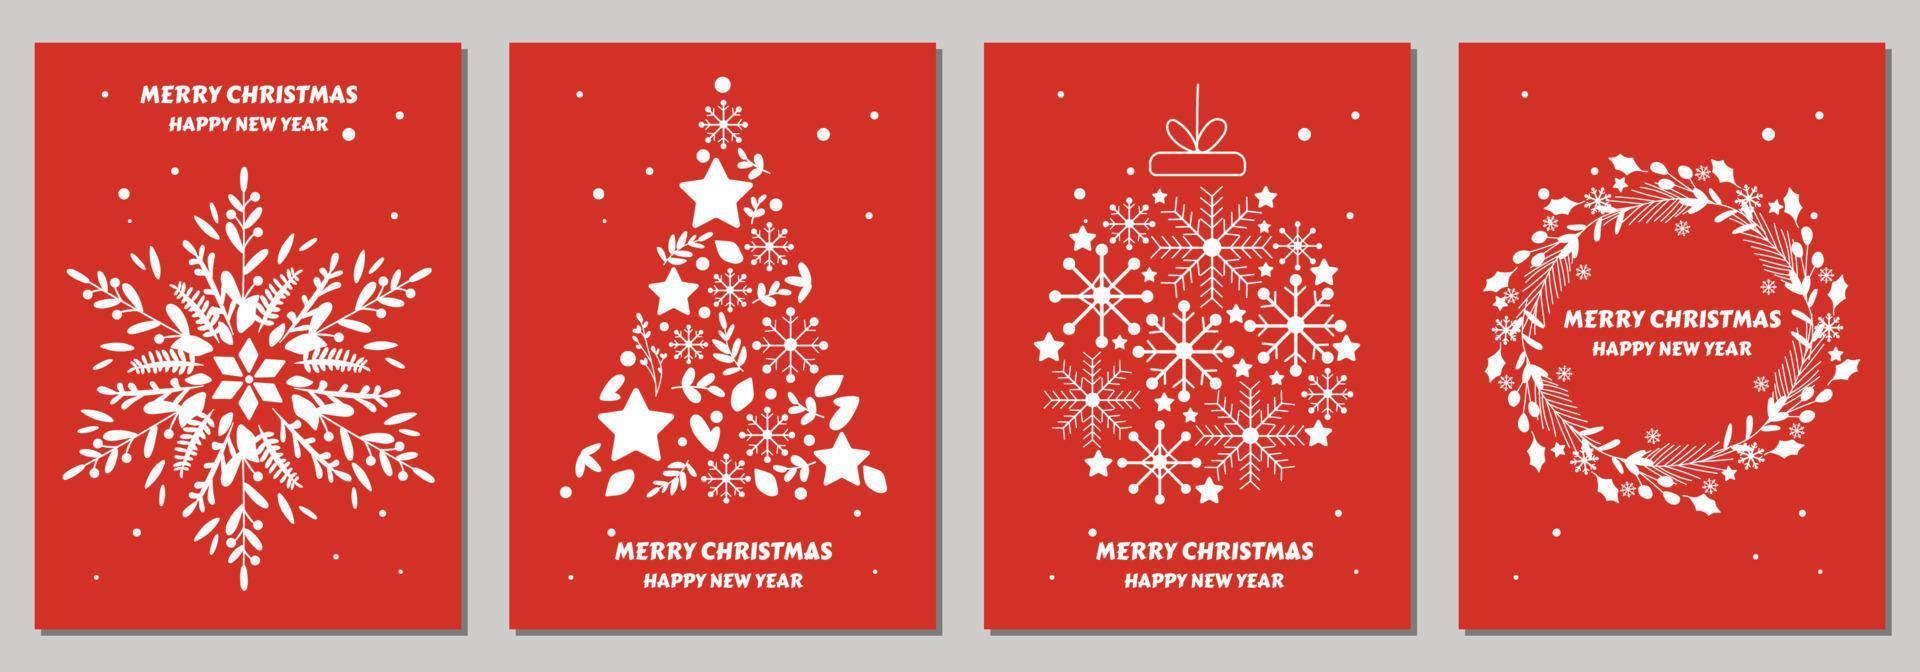 Christmas cards with merry christmas with xmas decorations and typography design. Vector illustration. Red and white color